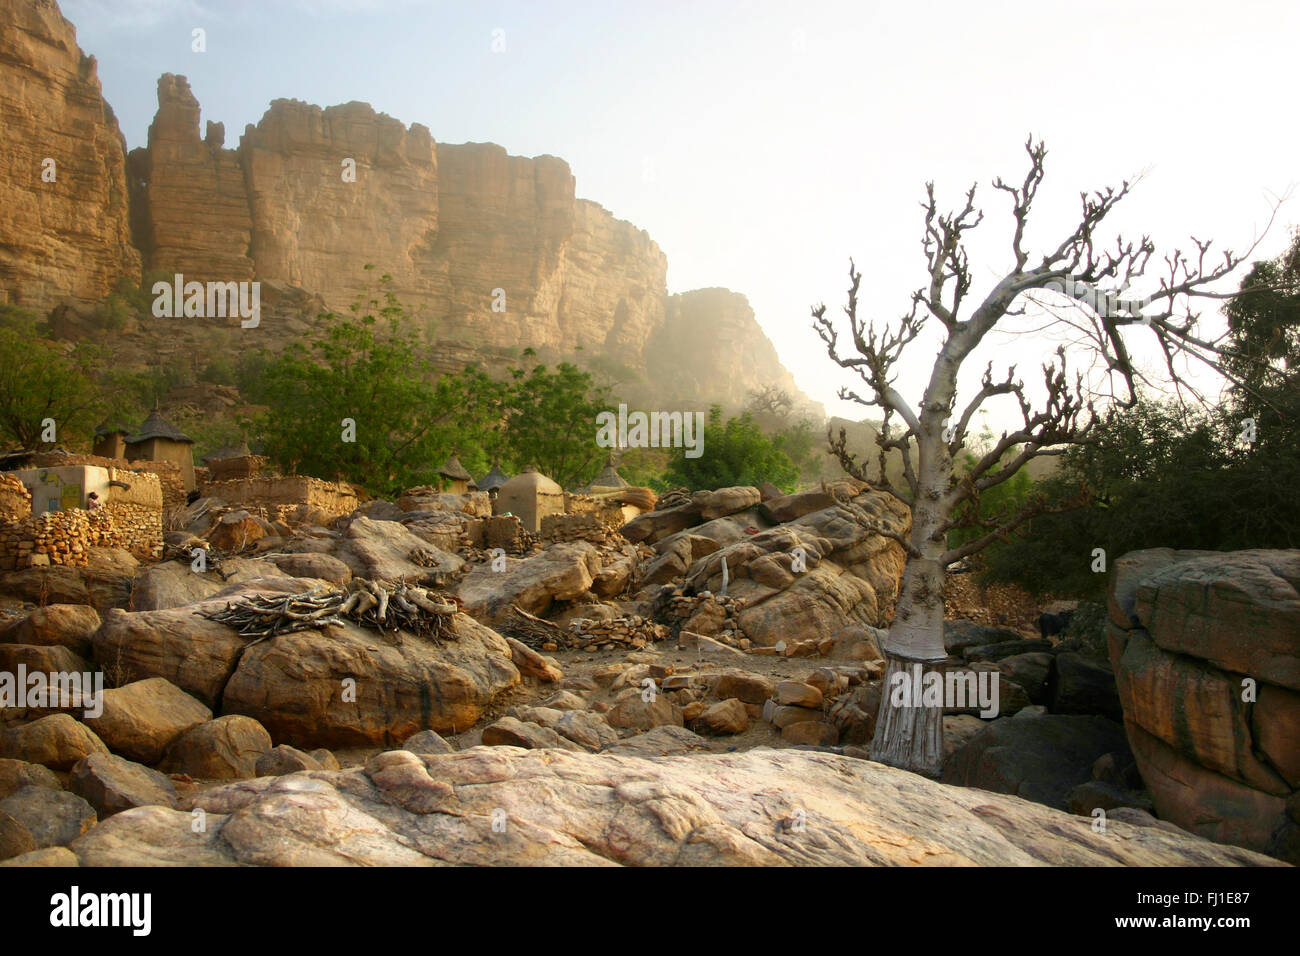 Landscape of the Dogon country along the cliff of Bandiagara in Mali Stock Photo